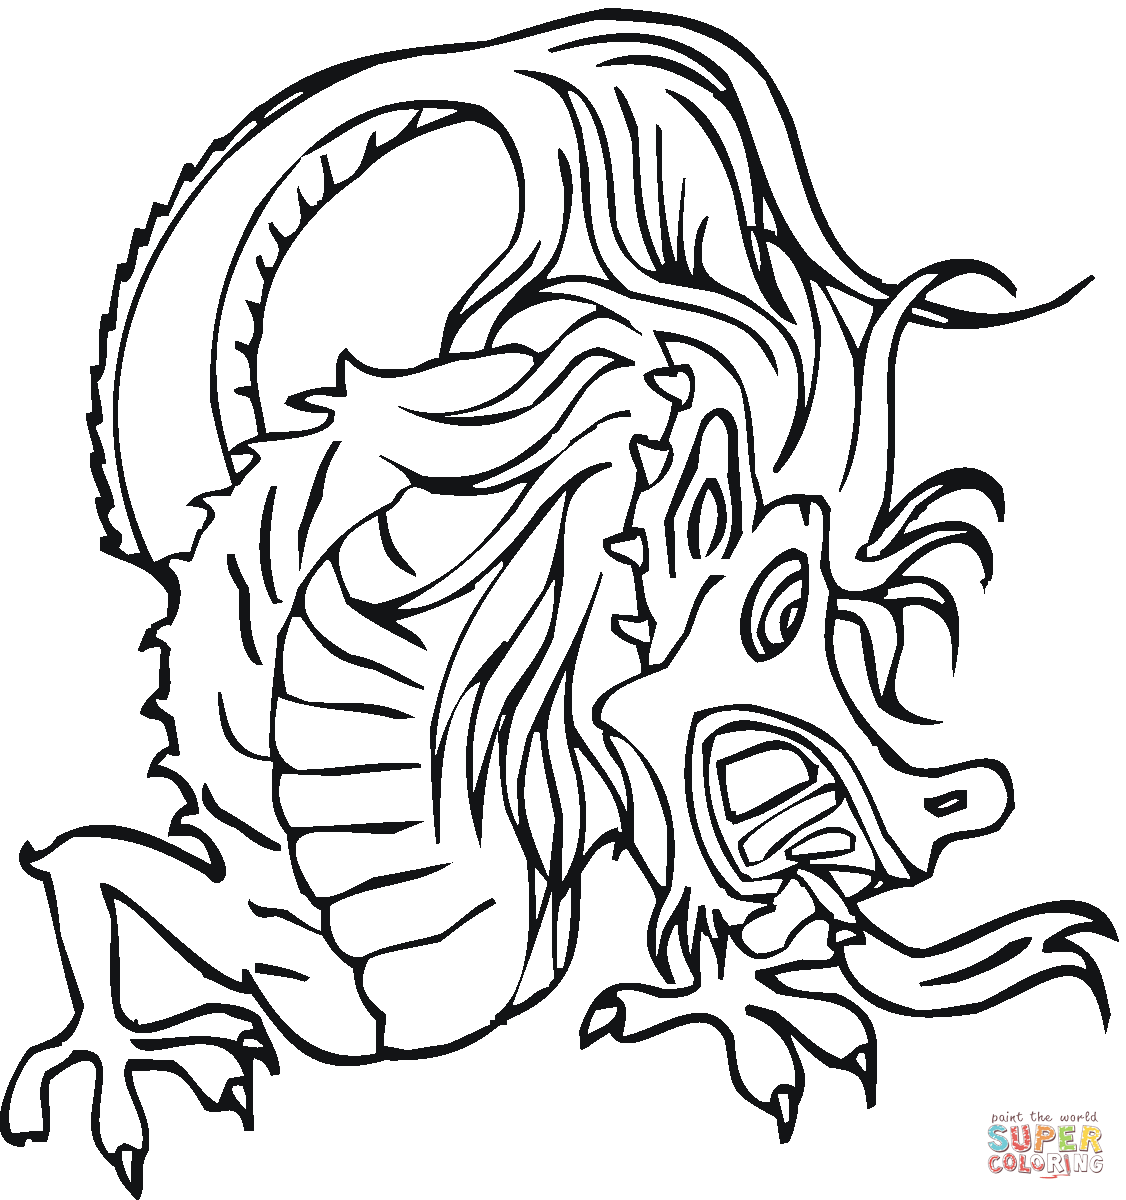 Chinese dragon coloring page | Free Printable Coloring Pages